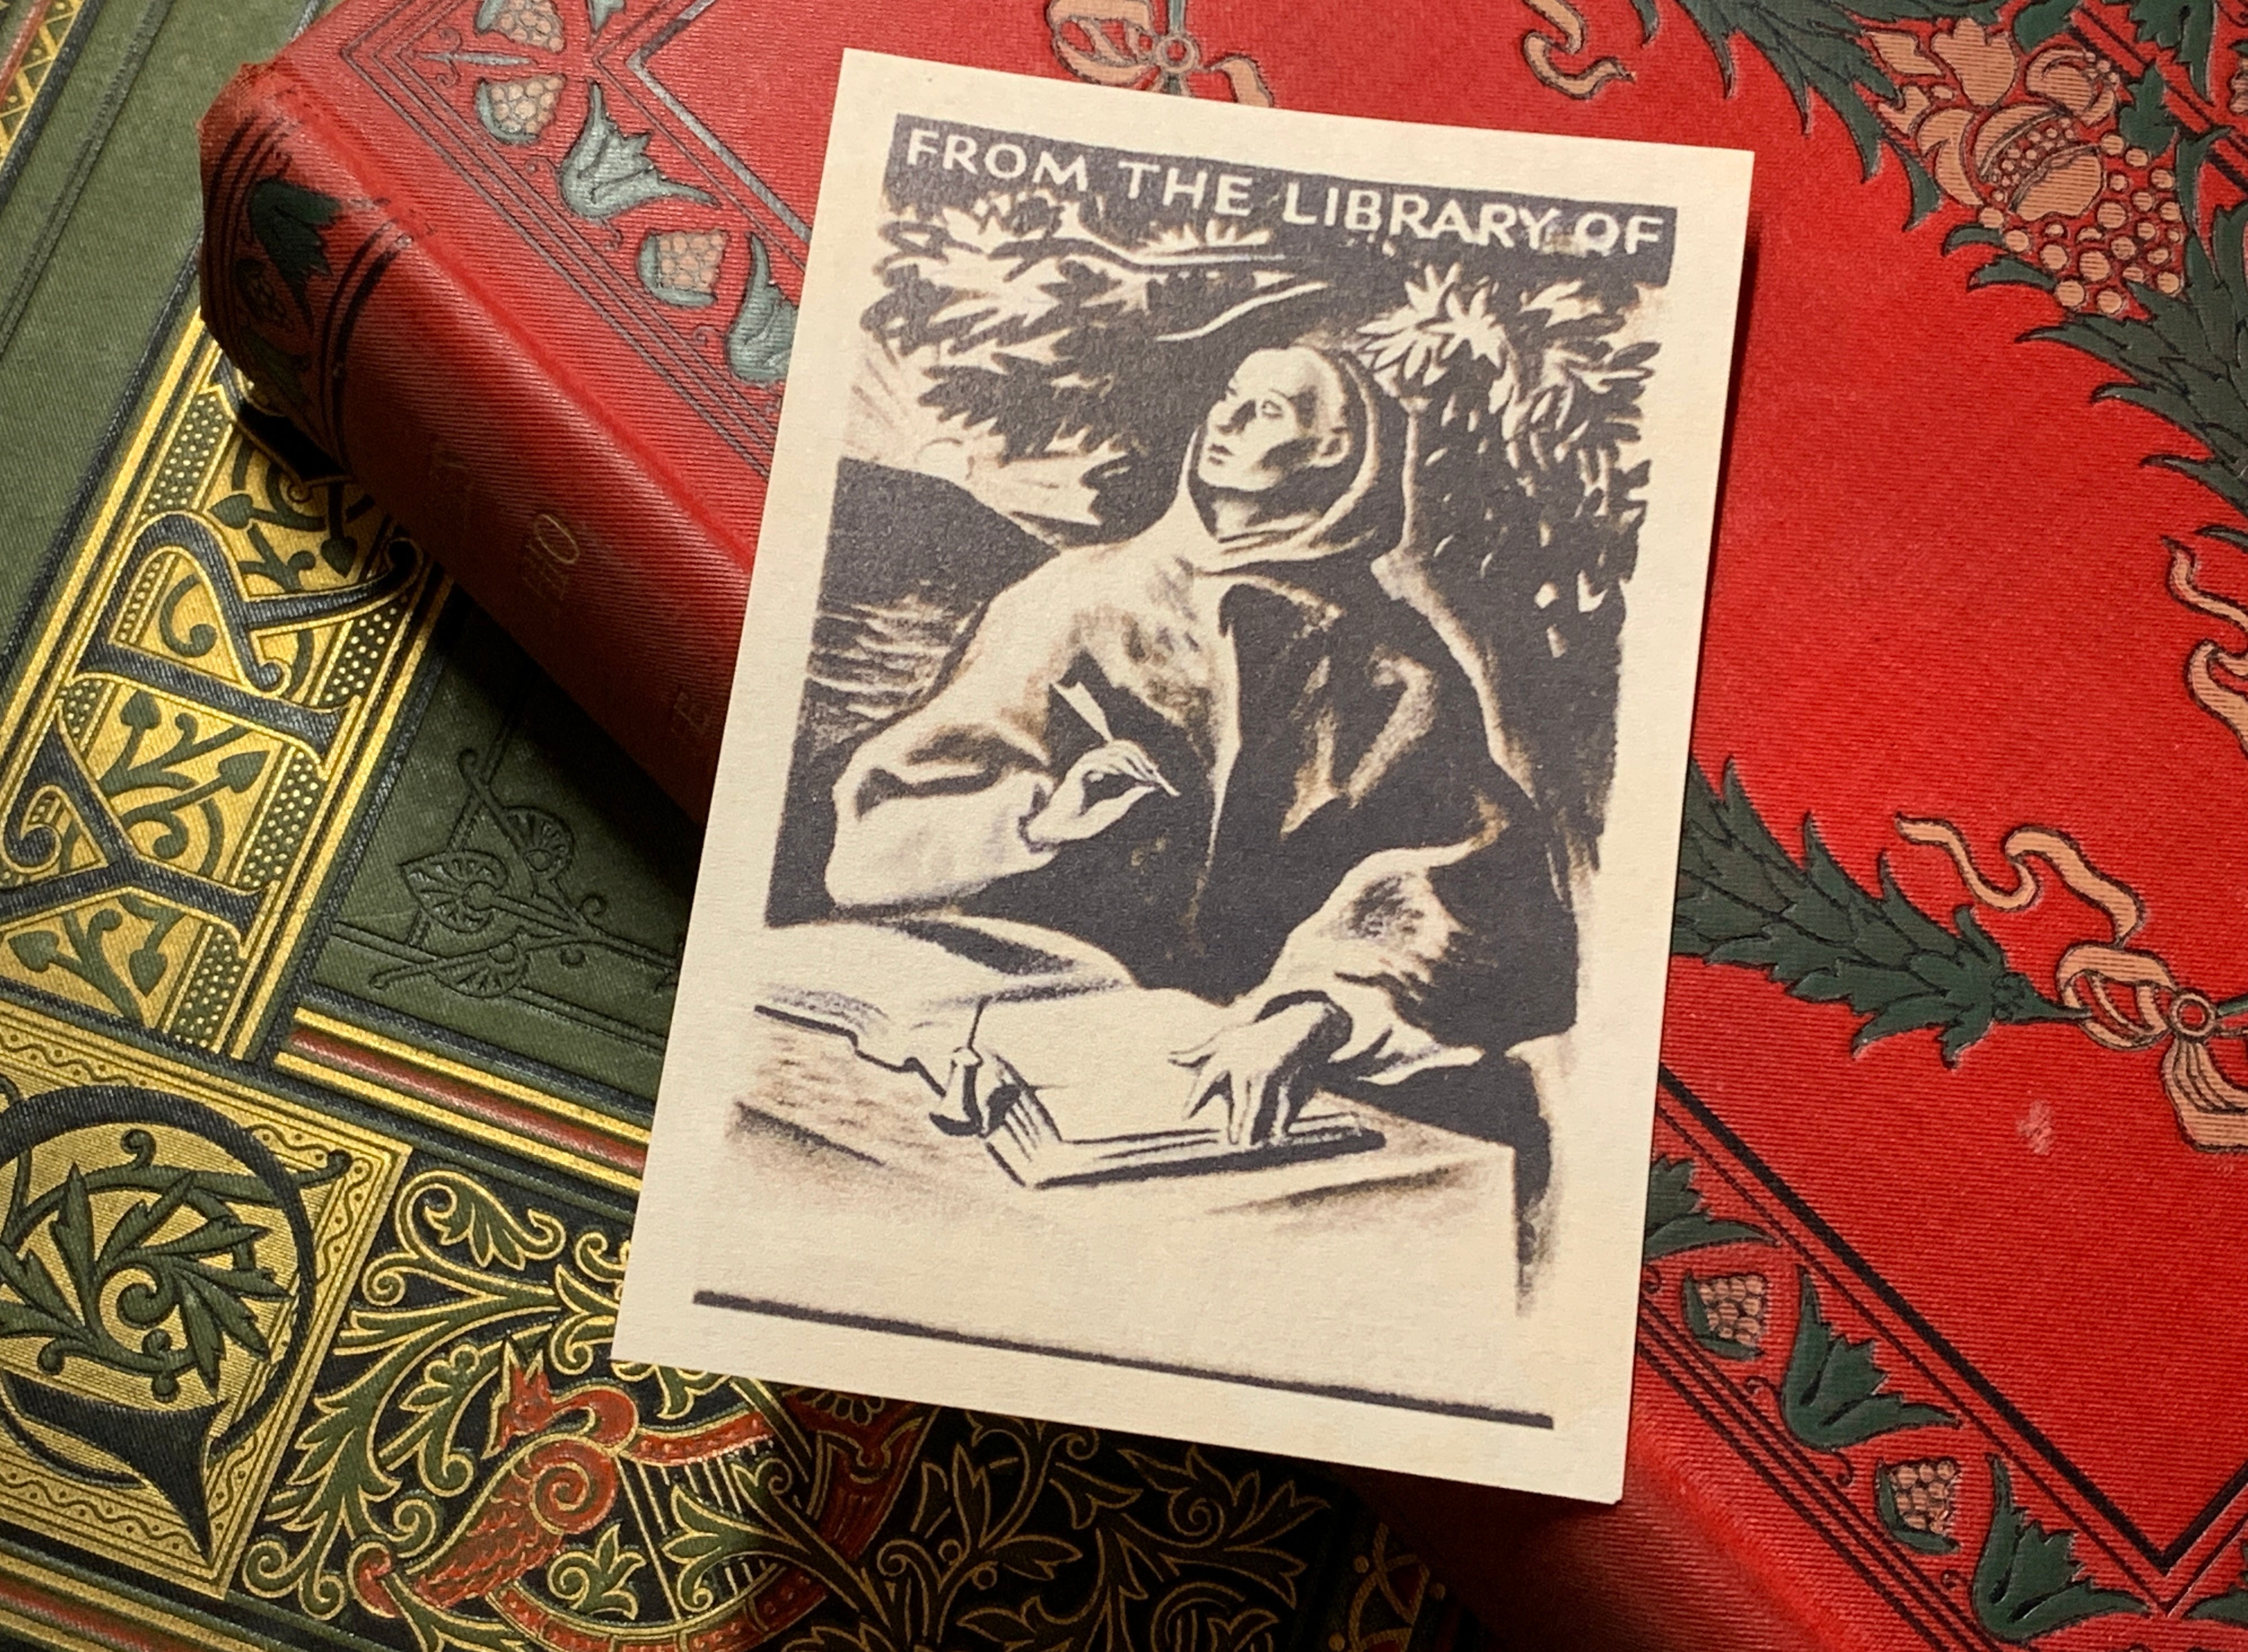 Monk Scribe, Personalized Ex-Libris Bookplates, Crafted on Traditional Gummed Paper, 2.75in x 4in, Set of 30